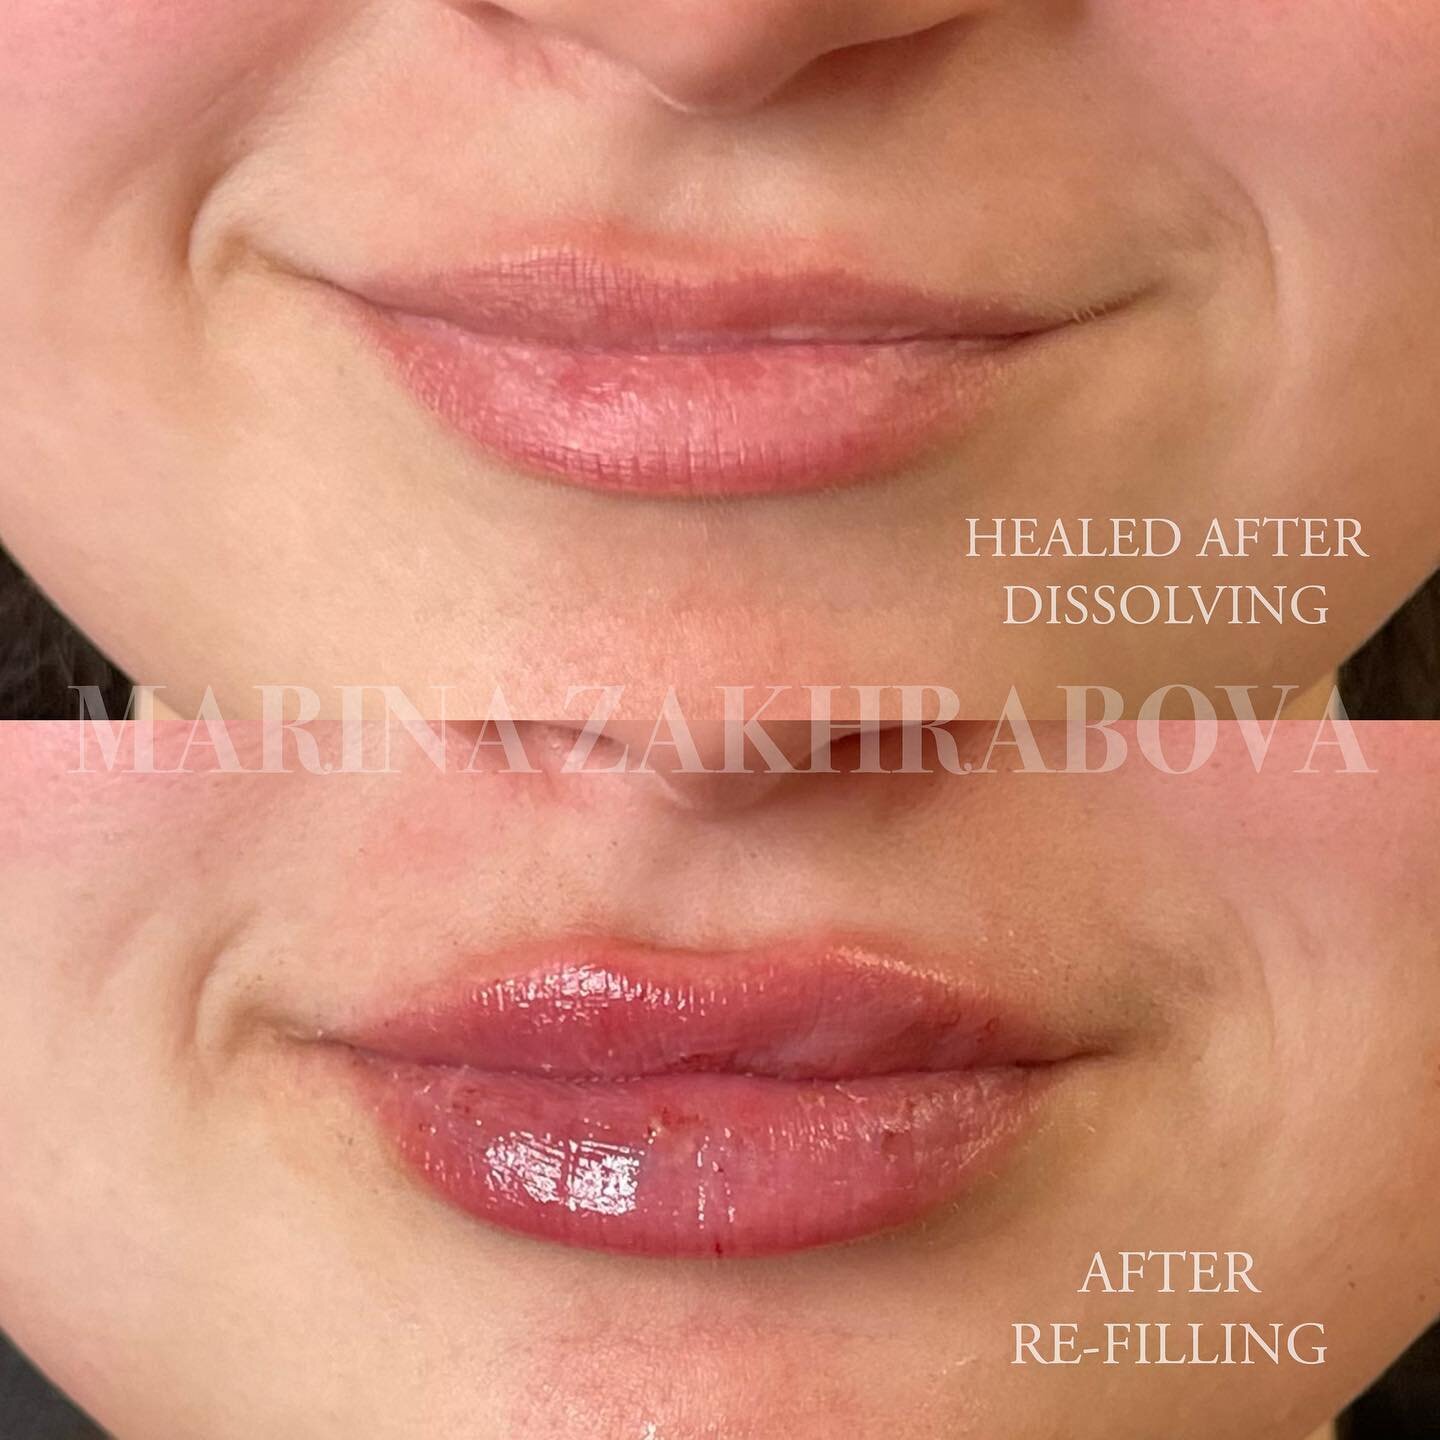 Took a page out of @jordonio.np&rsquo;s DISSOLVE✖RESOLVE book with these lips 📖📚💋

Initially, my patient came to see me for lip filler after having it previously done elsewhere. Migration was noted outside of the lip tissue, so we did one session 